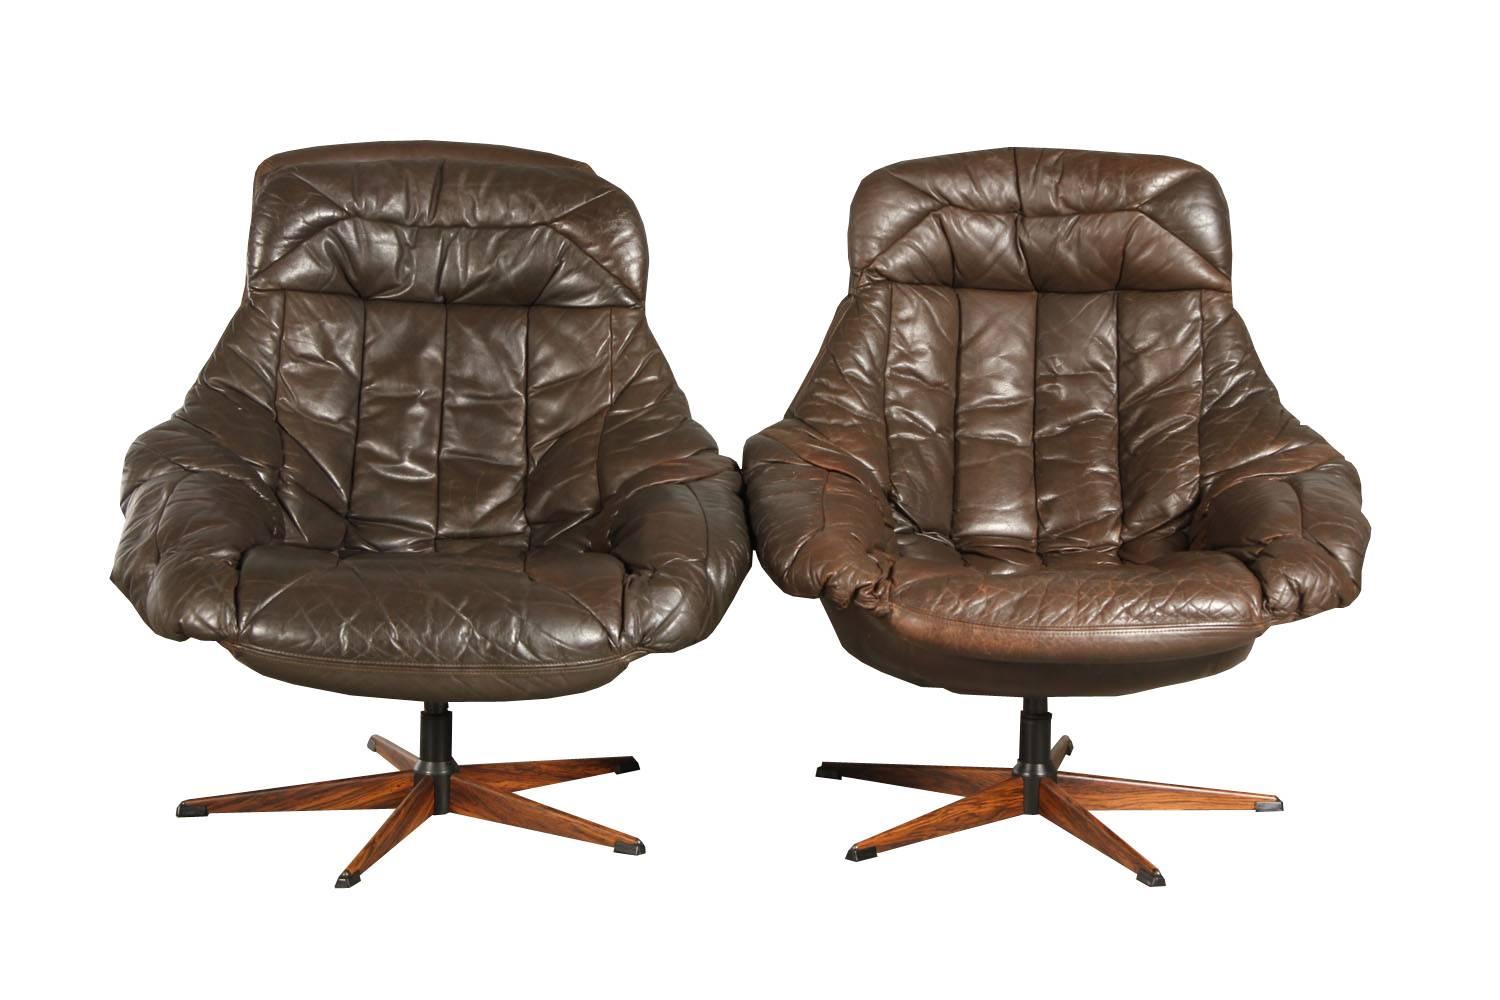 Model silhouette swivels armchairs designed by Henry Walter Klein and produced by Brahmin, designed in the 1970s. 

The armchairs are upholstered in original brown leather and mounted on five-star swivel metal base with faux rosewood